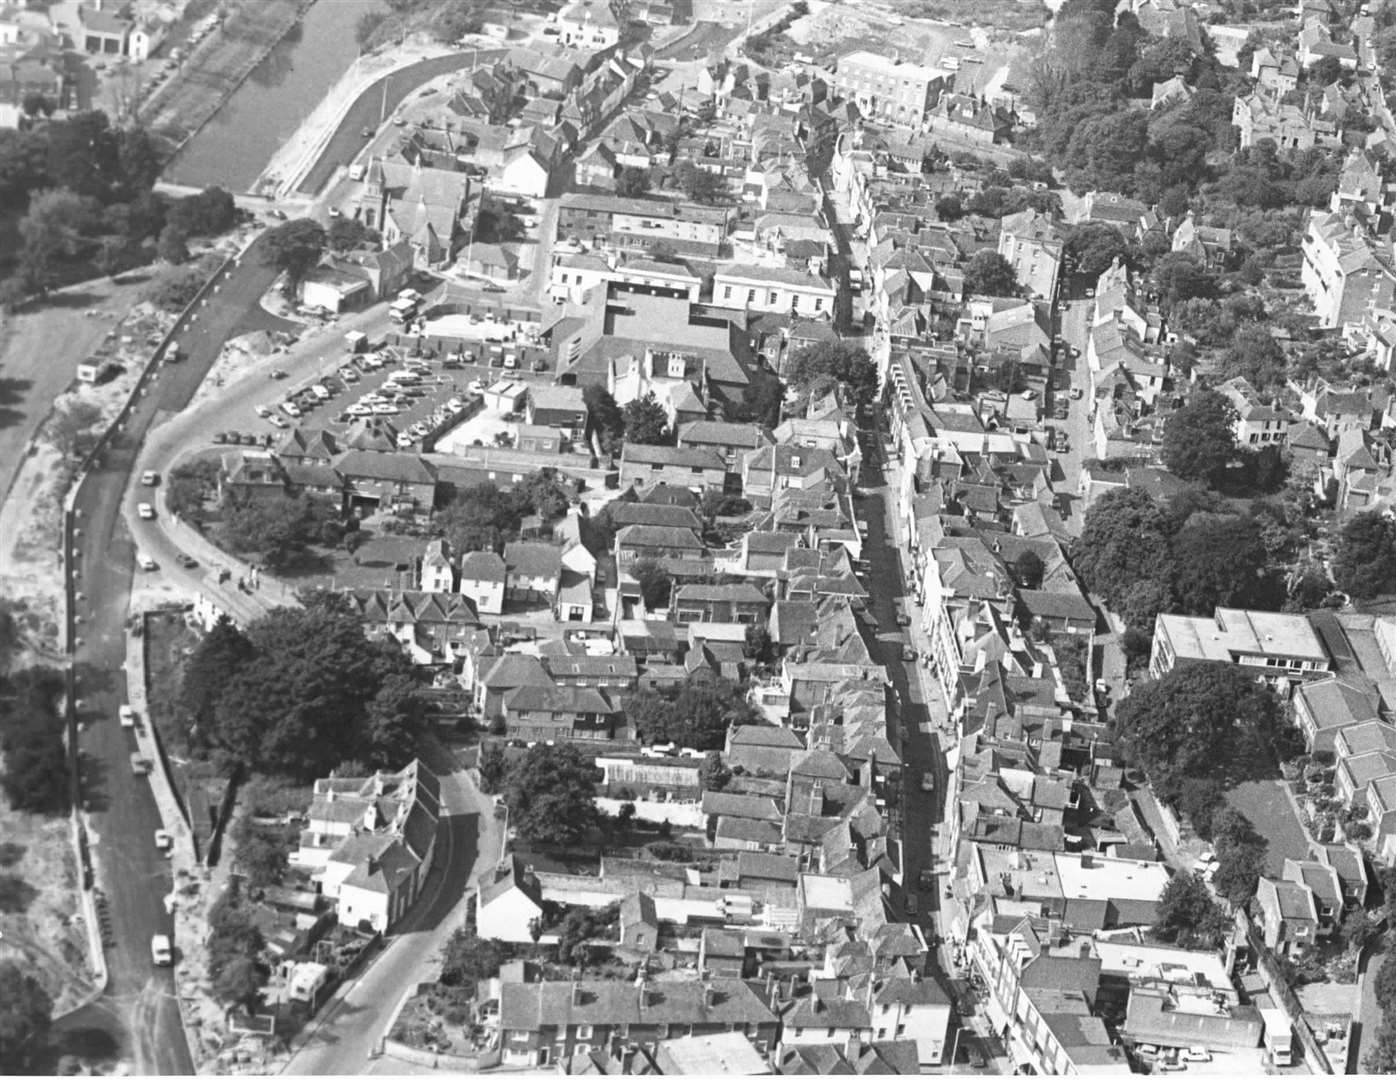 The centre of Hythe in 1980. The high street can be seen running through the middle of the frame